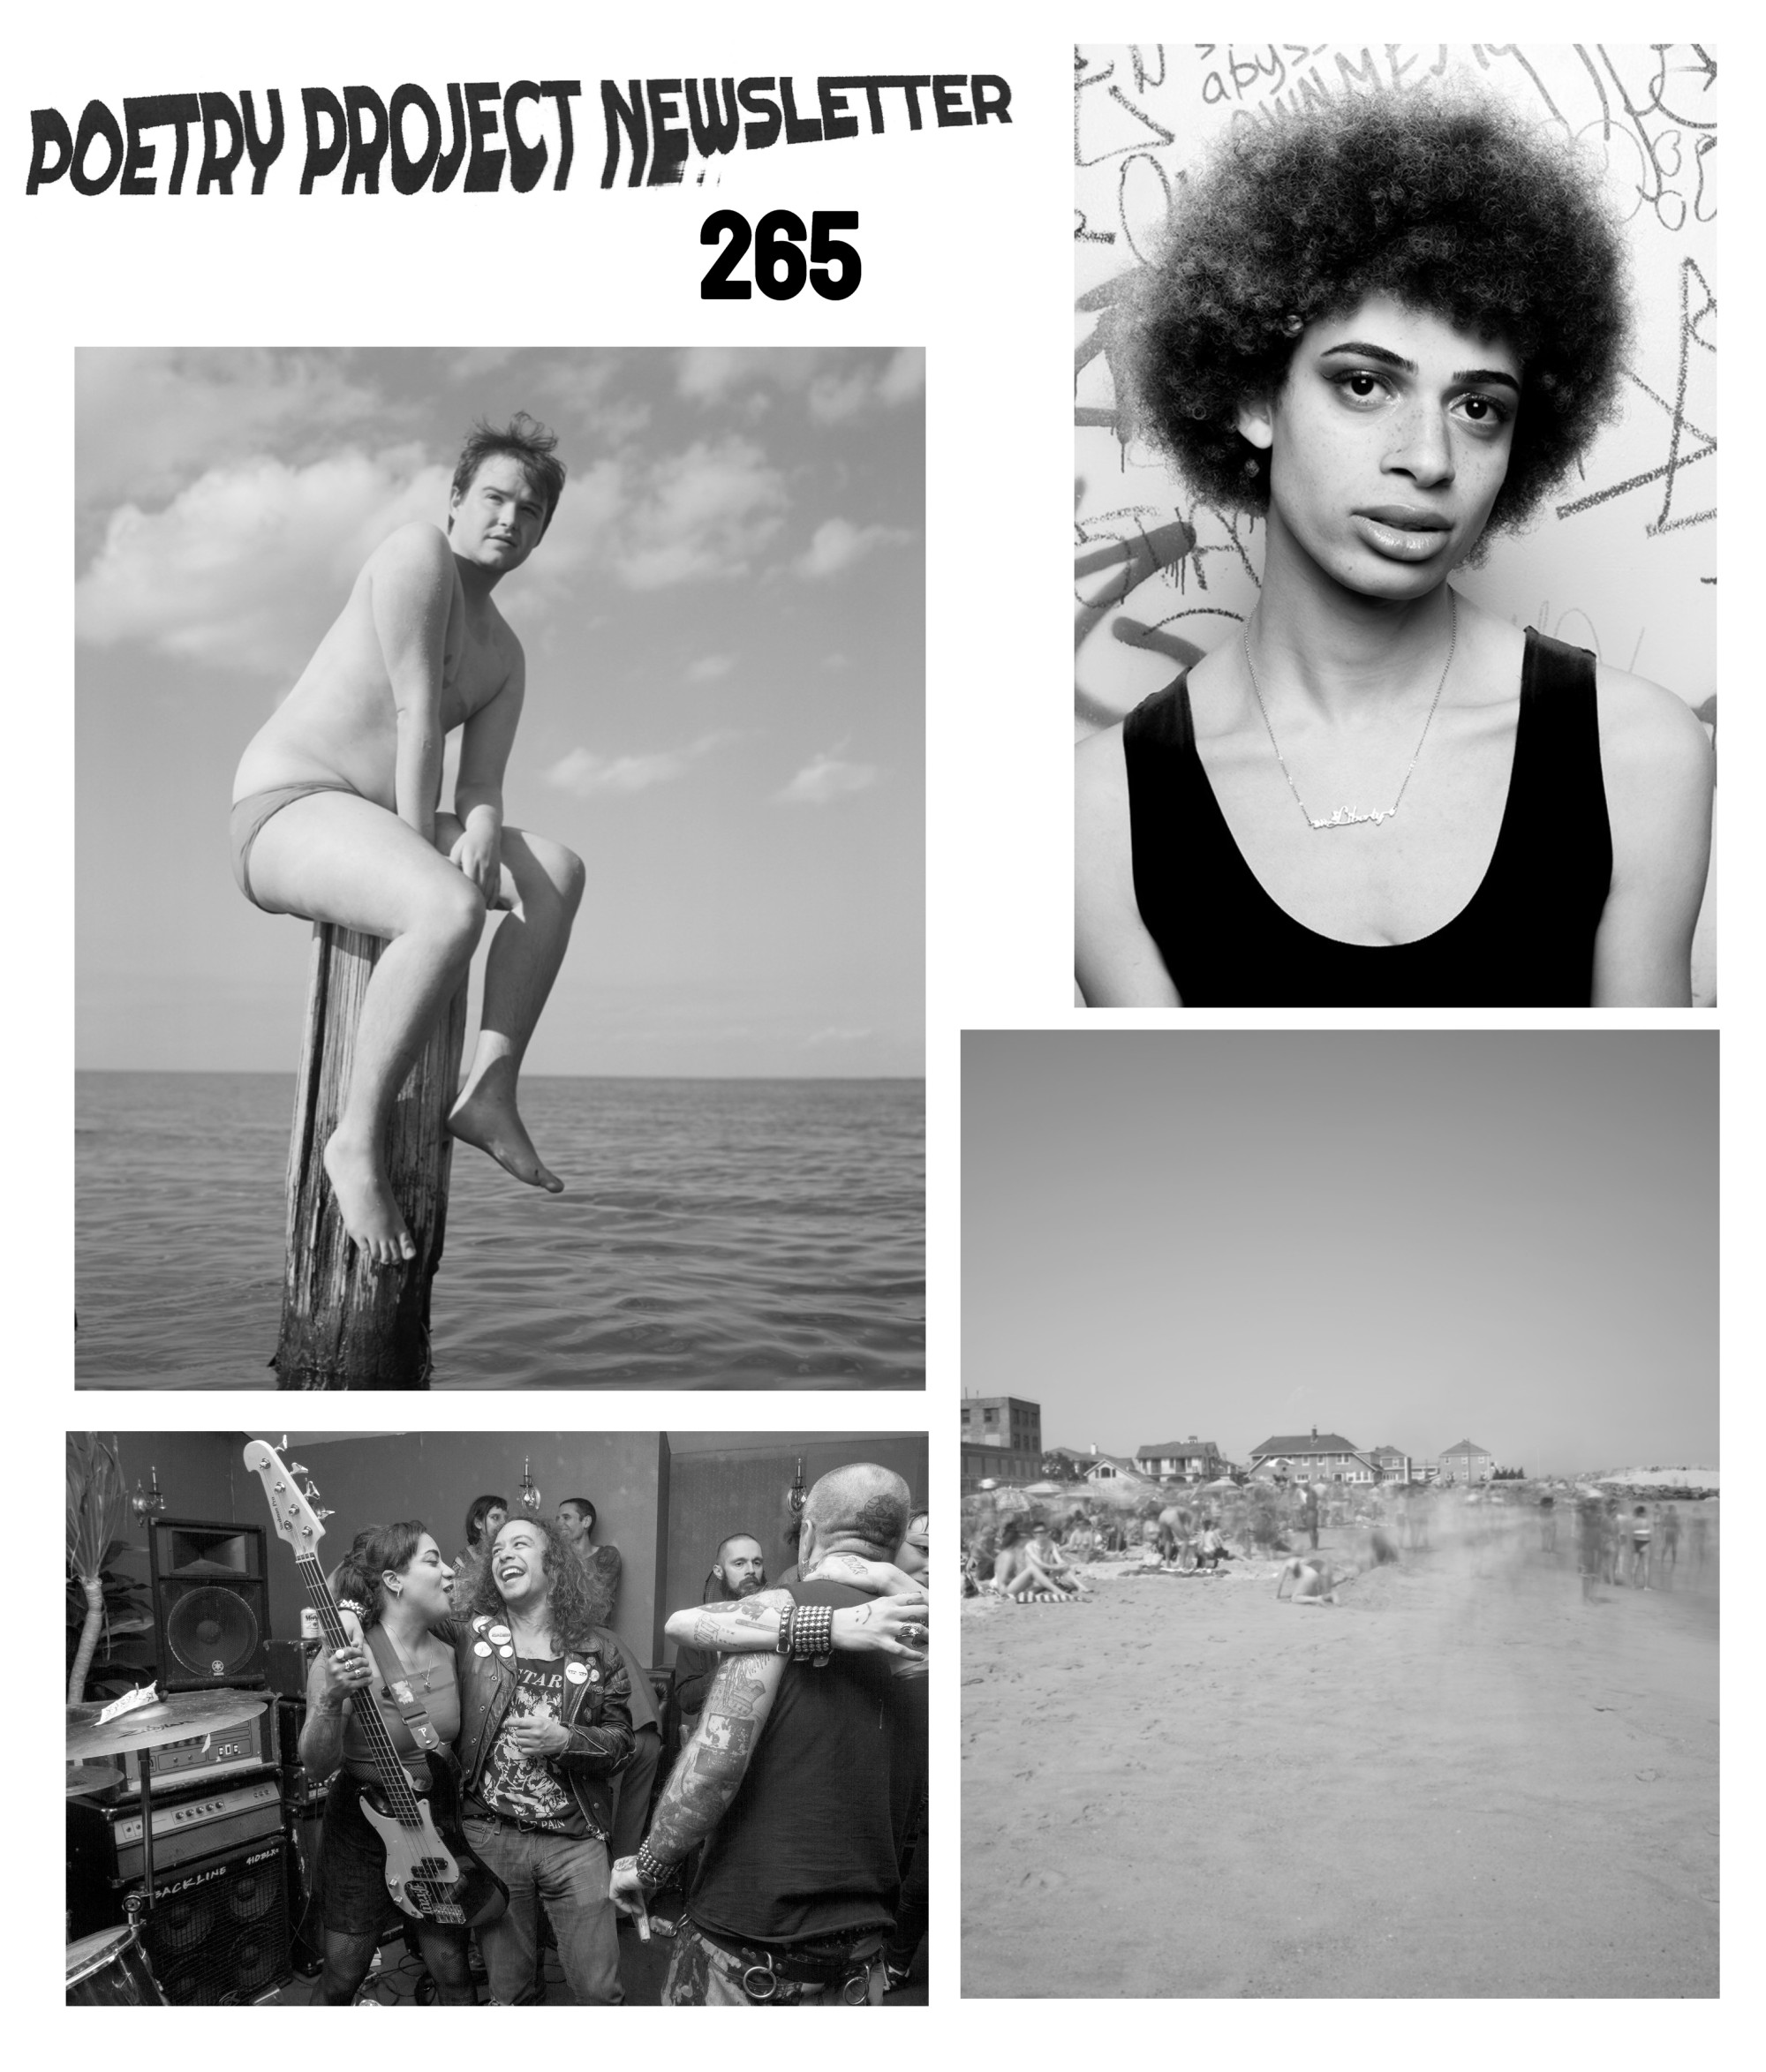 Photos by (clockwise from top left:) Chris Berntsen (photo of a person sitting on a pier pile in the water), Destiny Mata (portrait of a person wearing a black tank top), Chris Berntsen (landscape photo of a beach), Destiny Mata (a group of friends gathered and embracing, one holding a bass guitar)